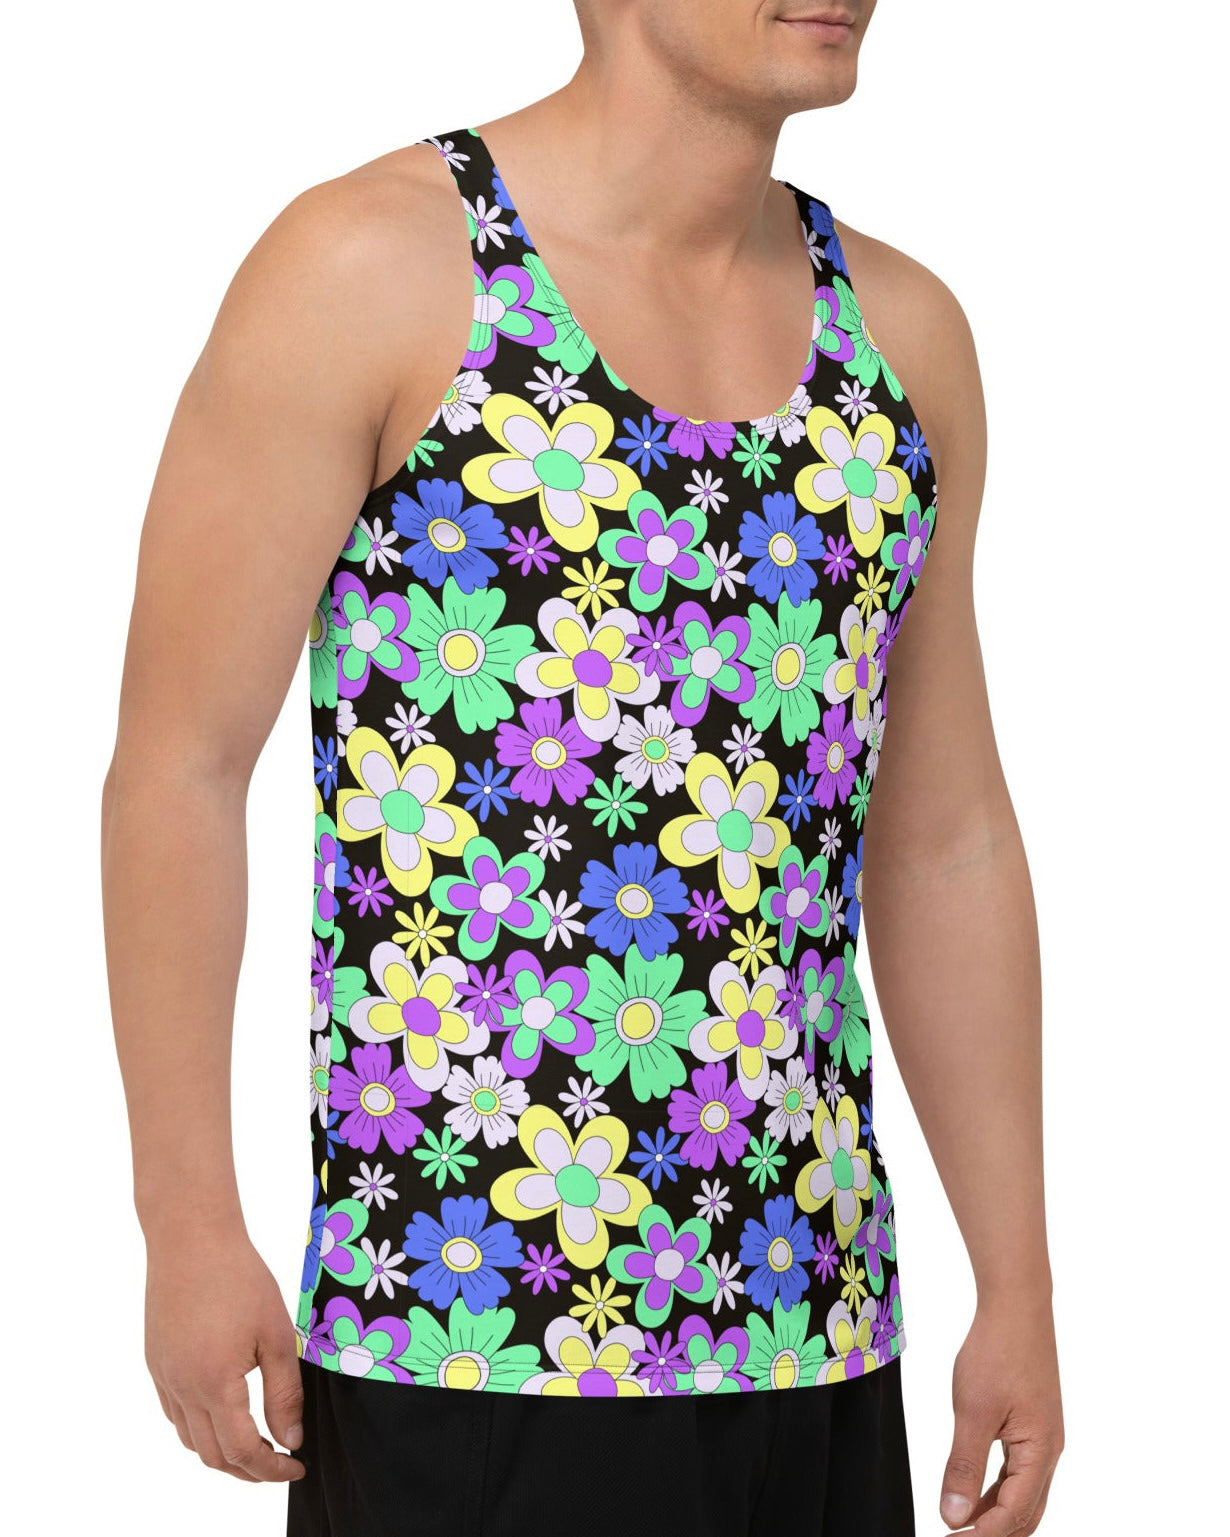 Crazy Daisy Tank Top, Tank Top, - One Stop Rave